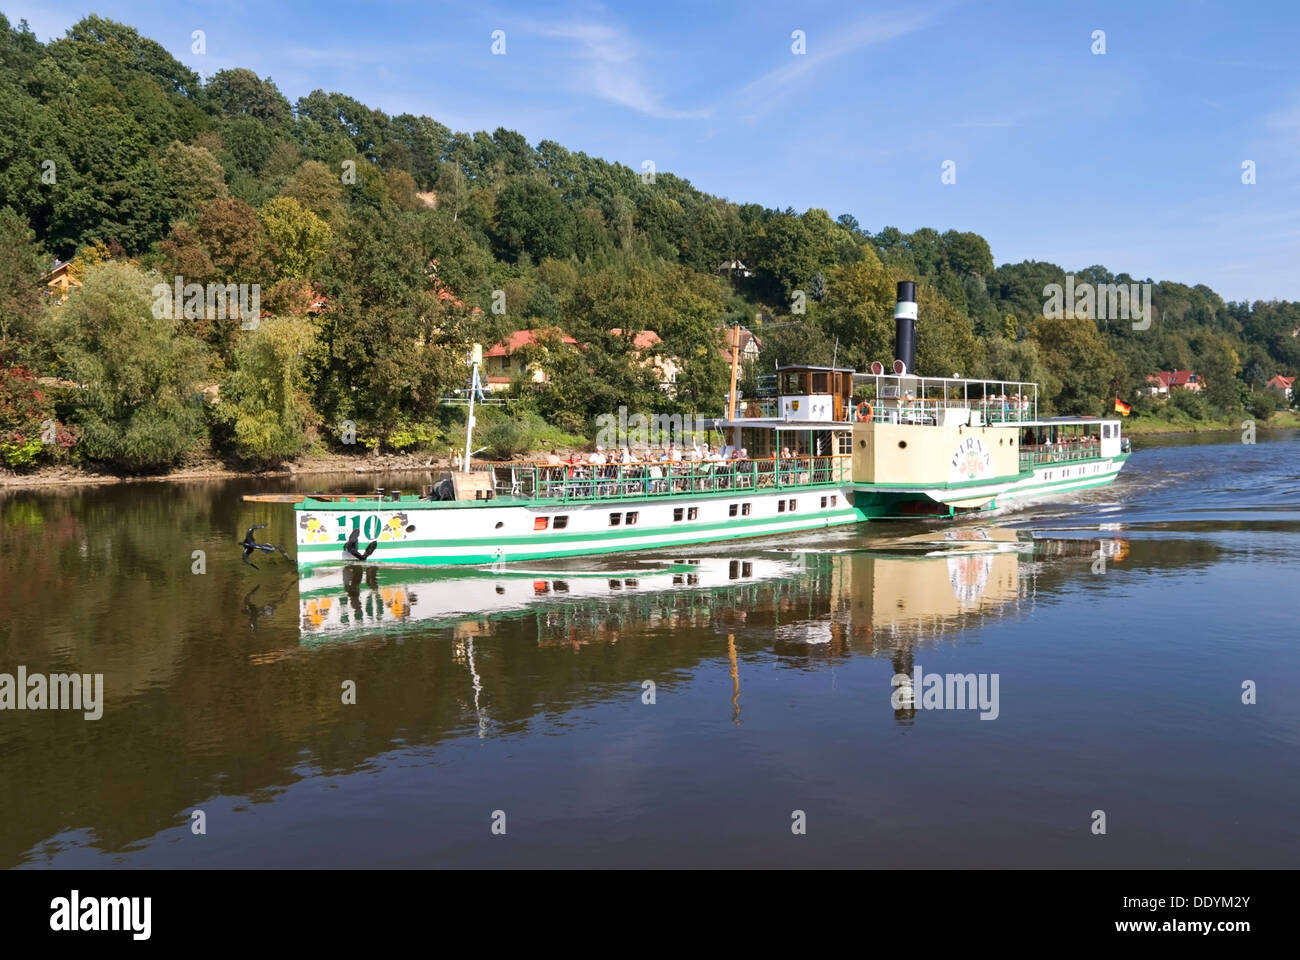 Steamboat Pirna on the river Elbe, Saxony Stock Photo